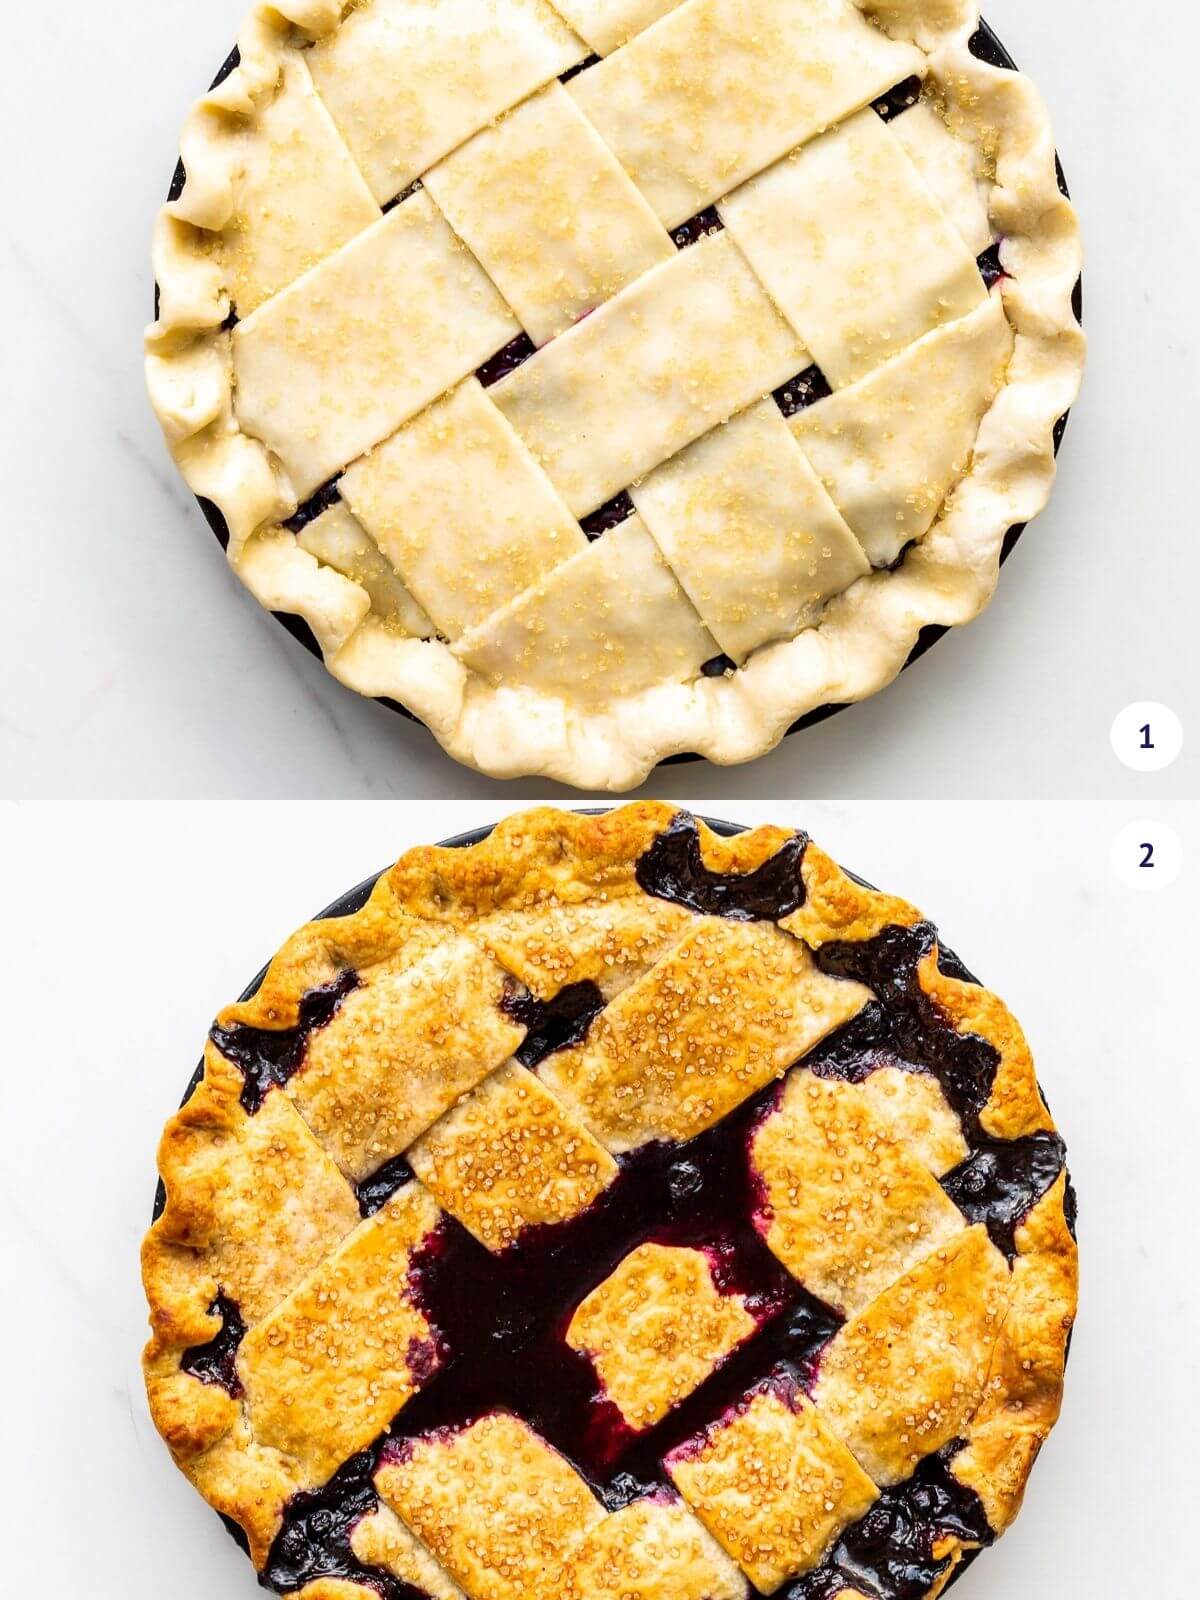 Homemade blueberry pie before and after baking.